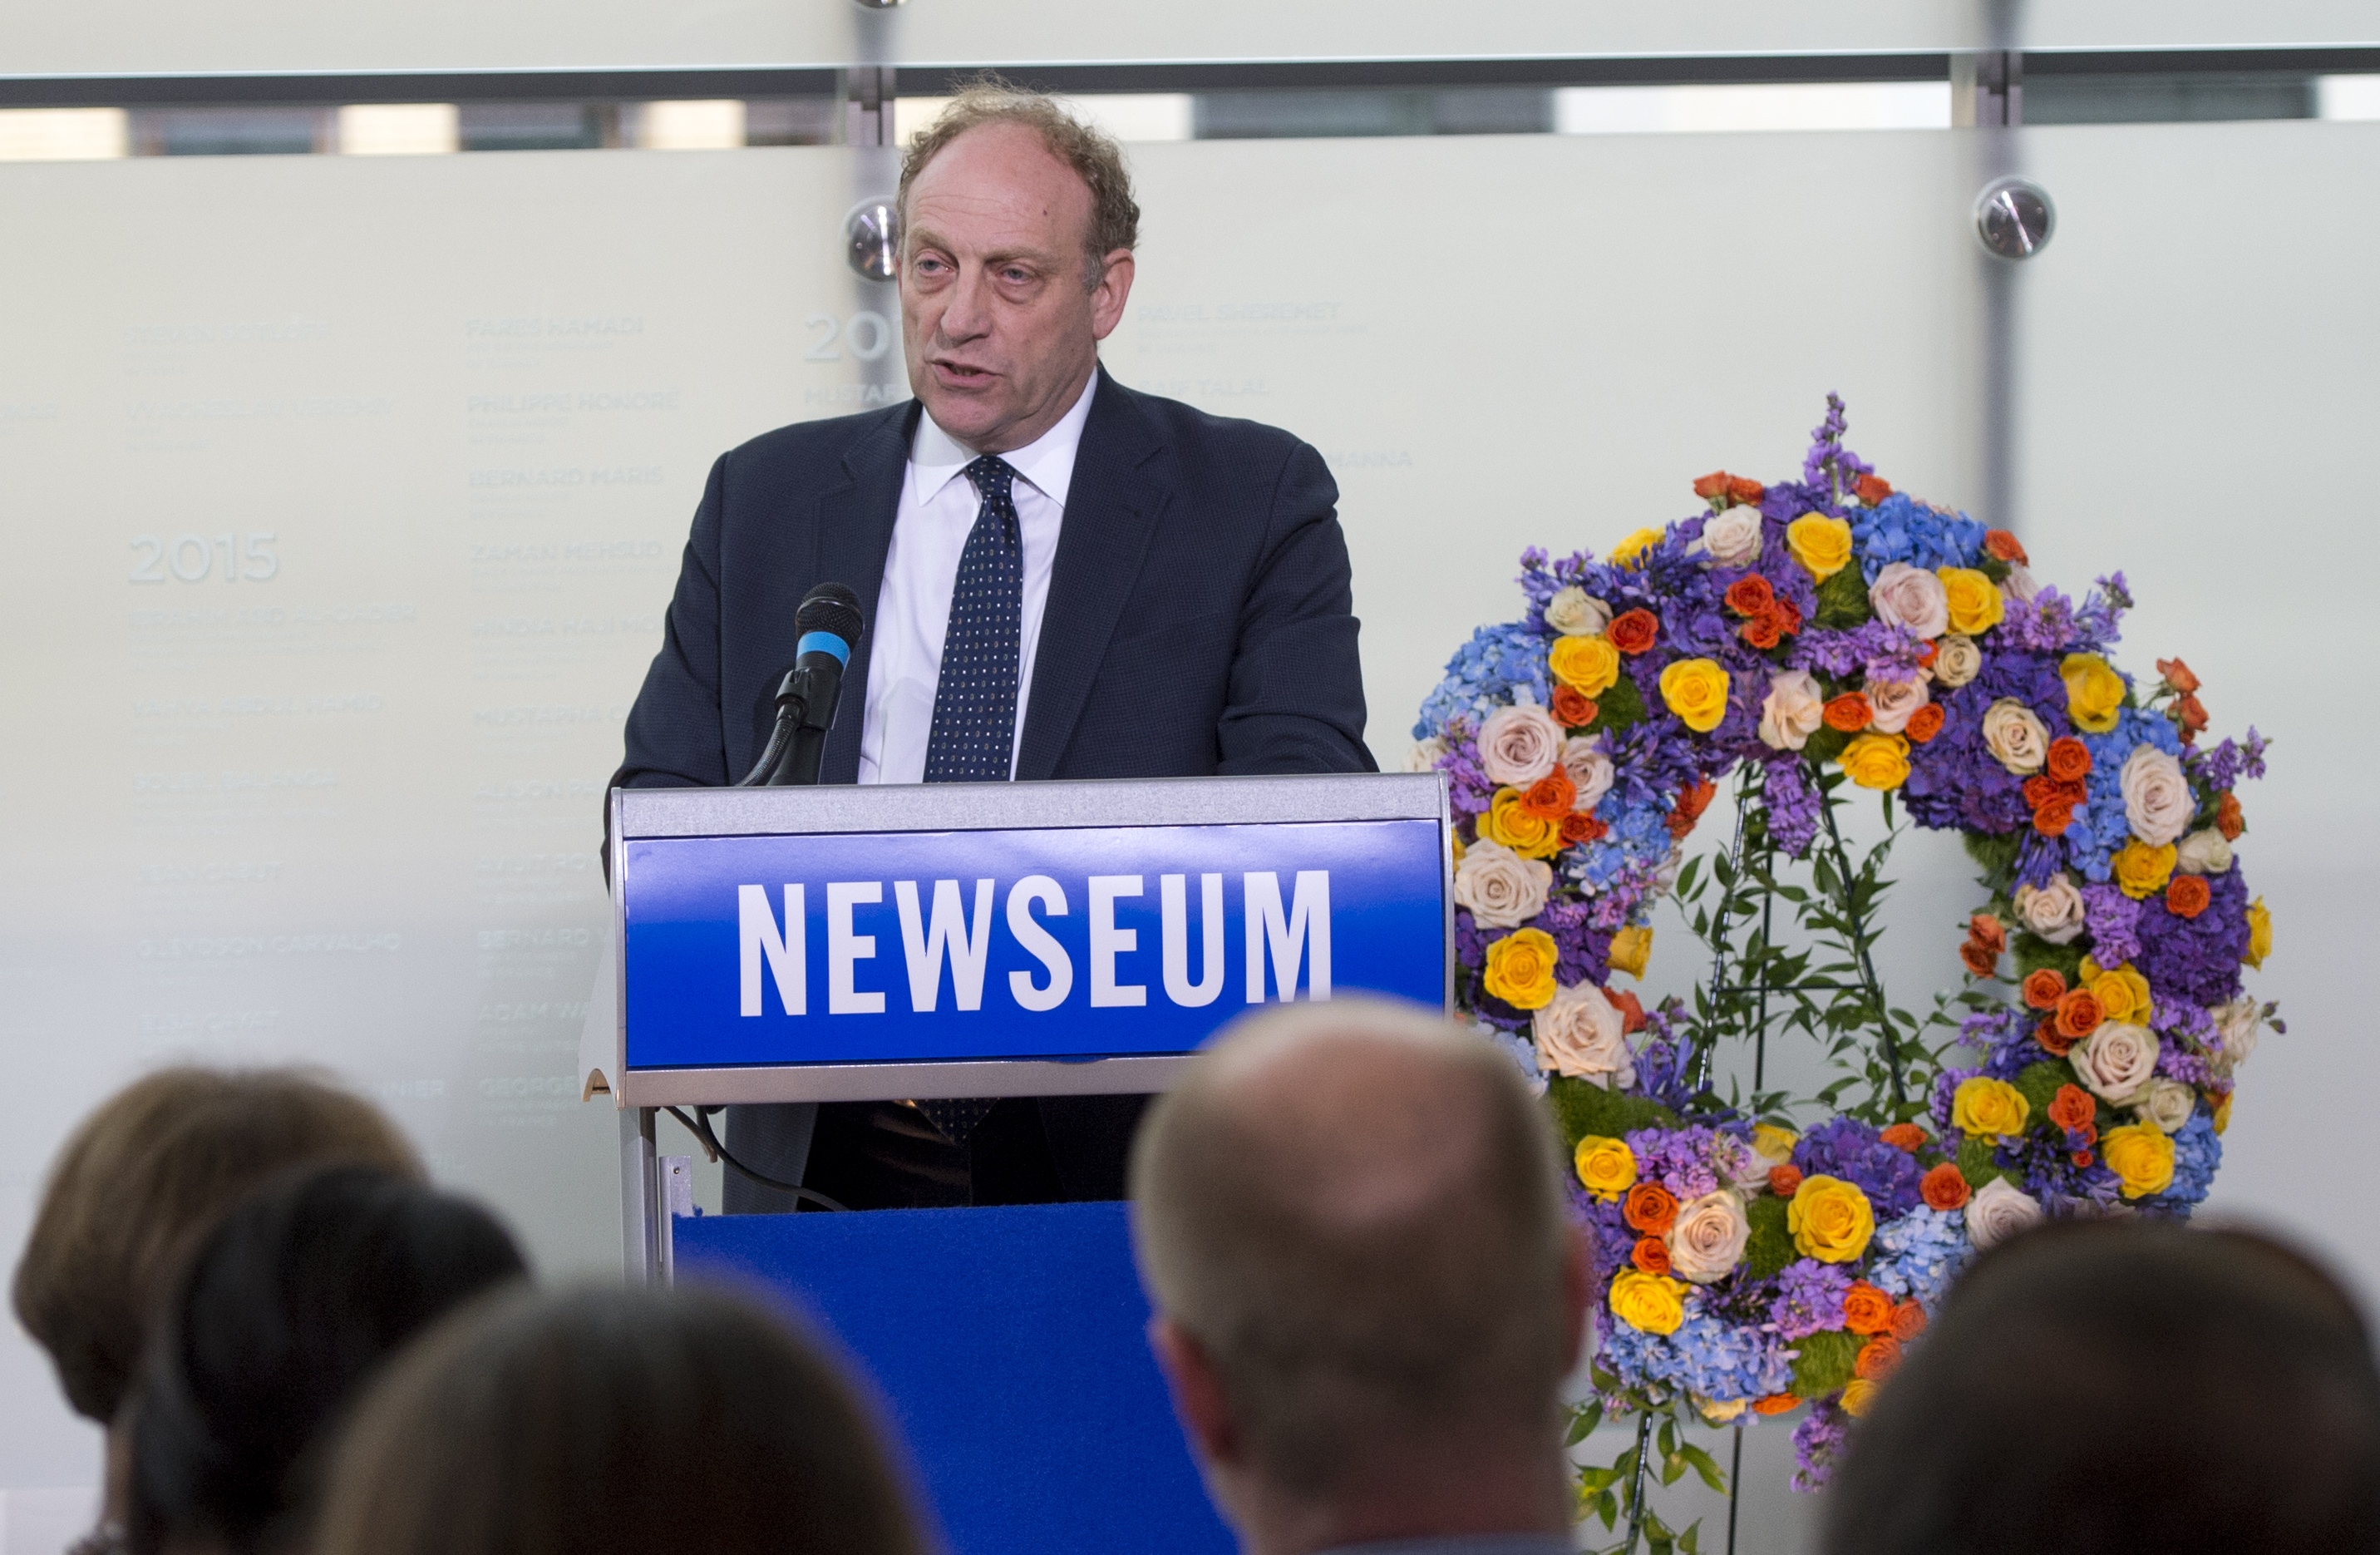 Michael Oreskes, senior vice president of news and editorial director of National Public Radio (NPR), speaks at the Newseum in Washington, DC, on June 5, 2017. (Saul Loeb—AFP/Getty Images)